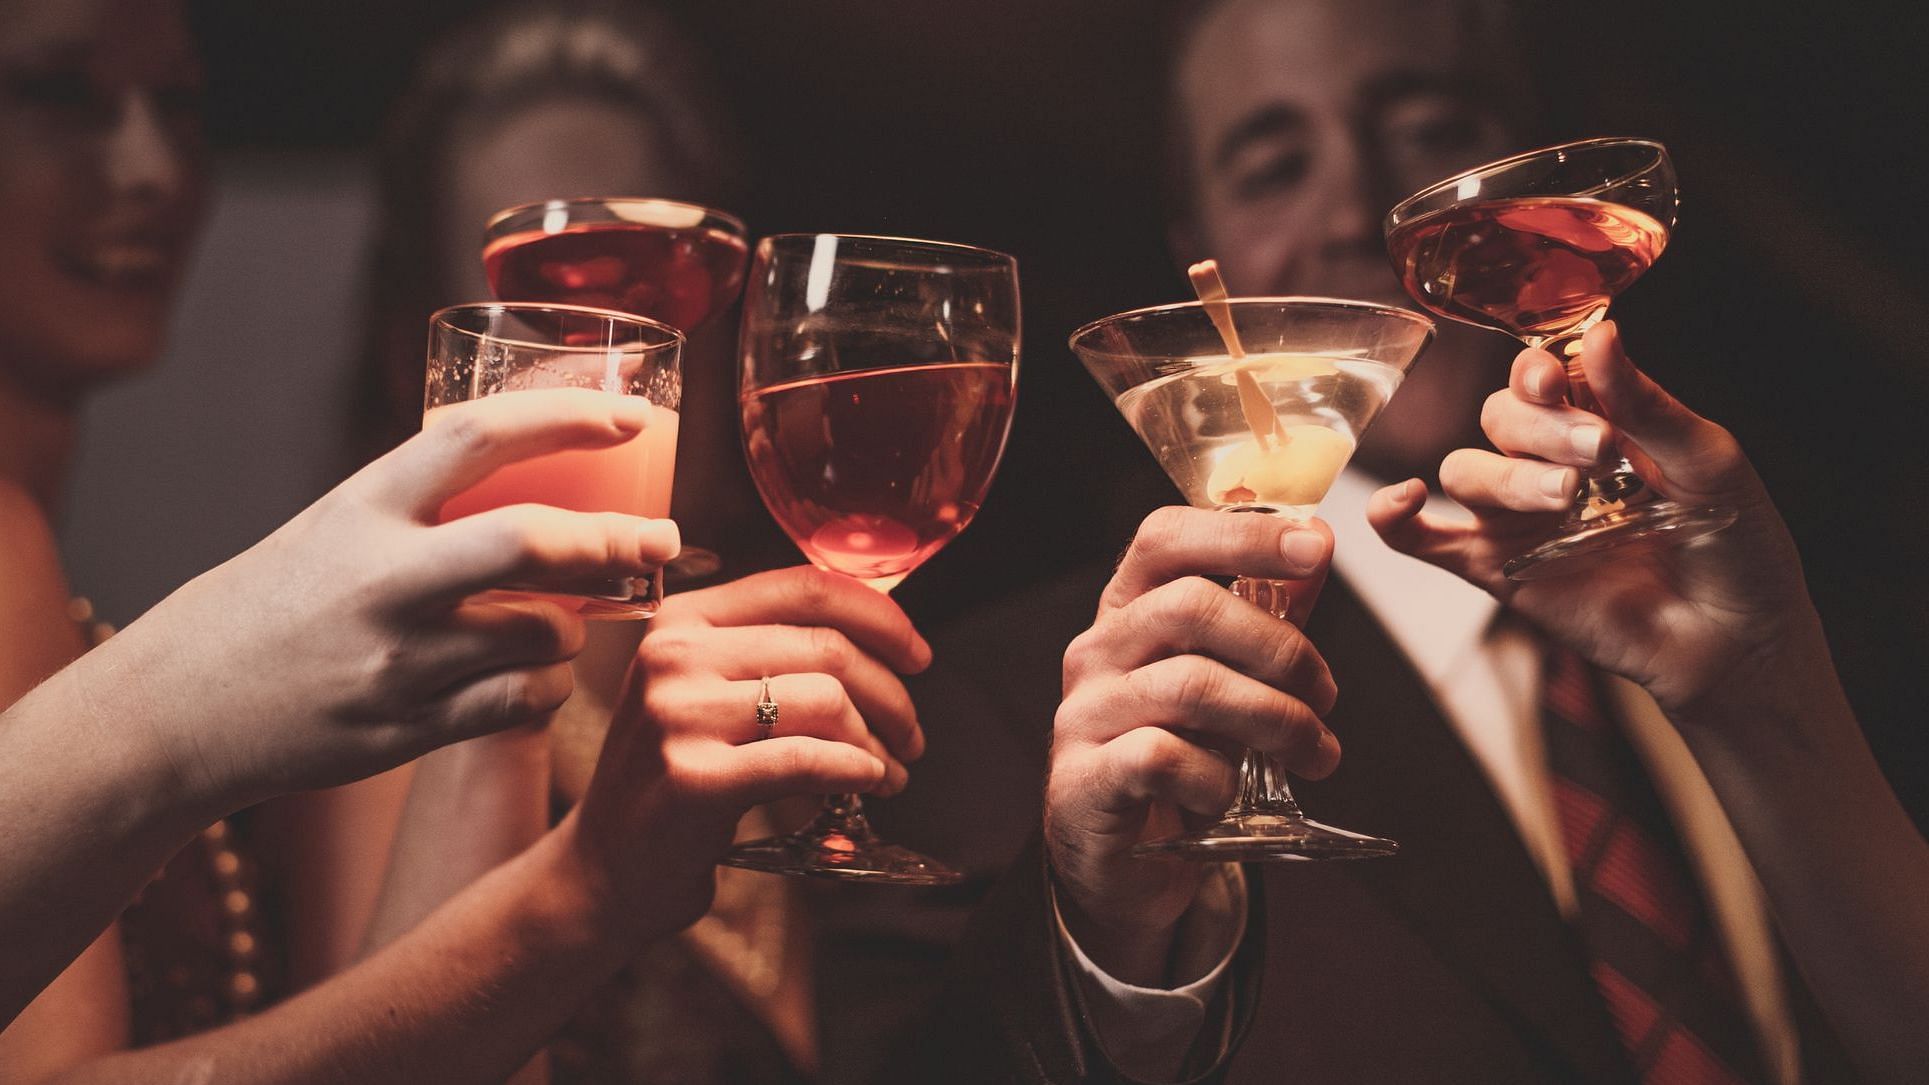 A new study finds frequent drinking to be worse than binge drinking